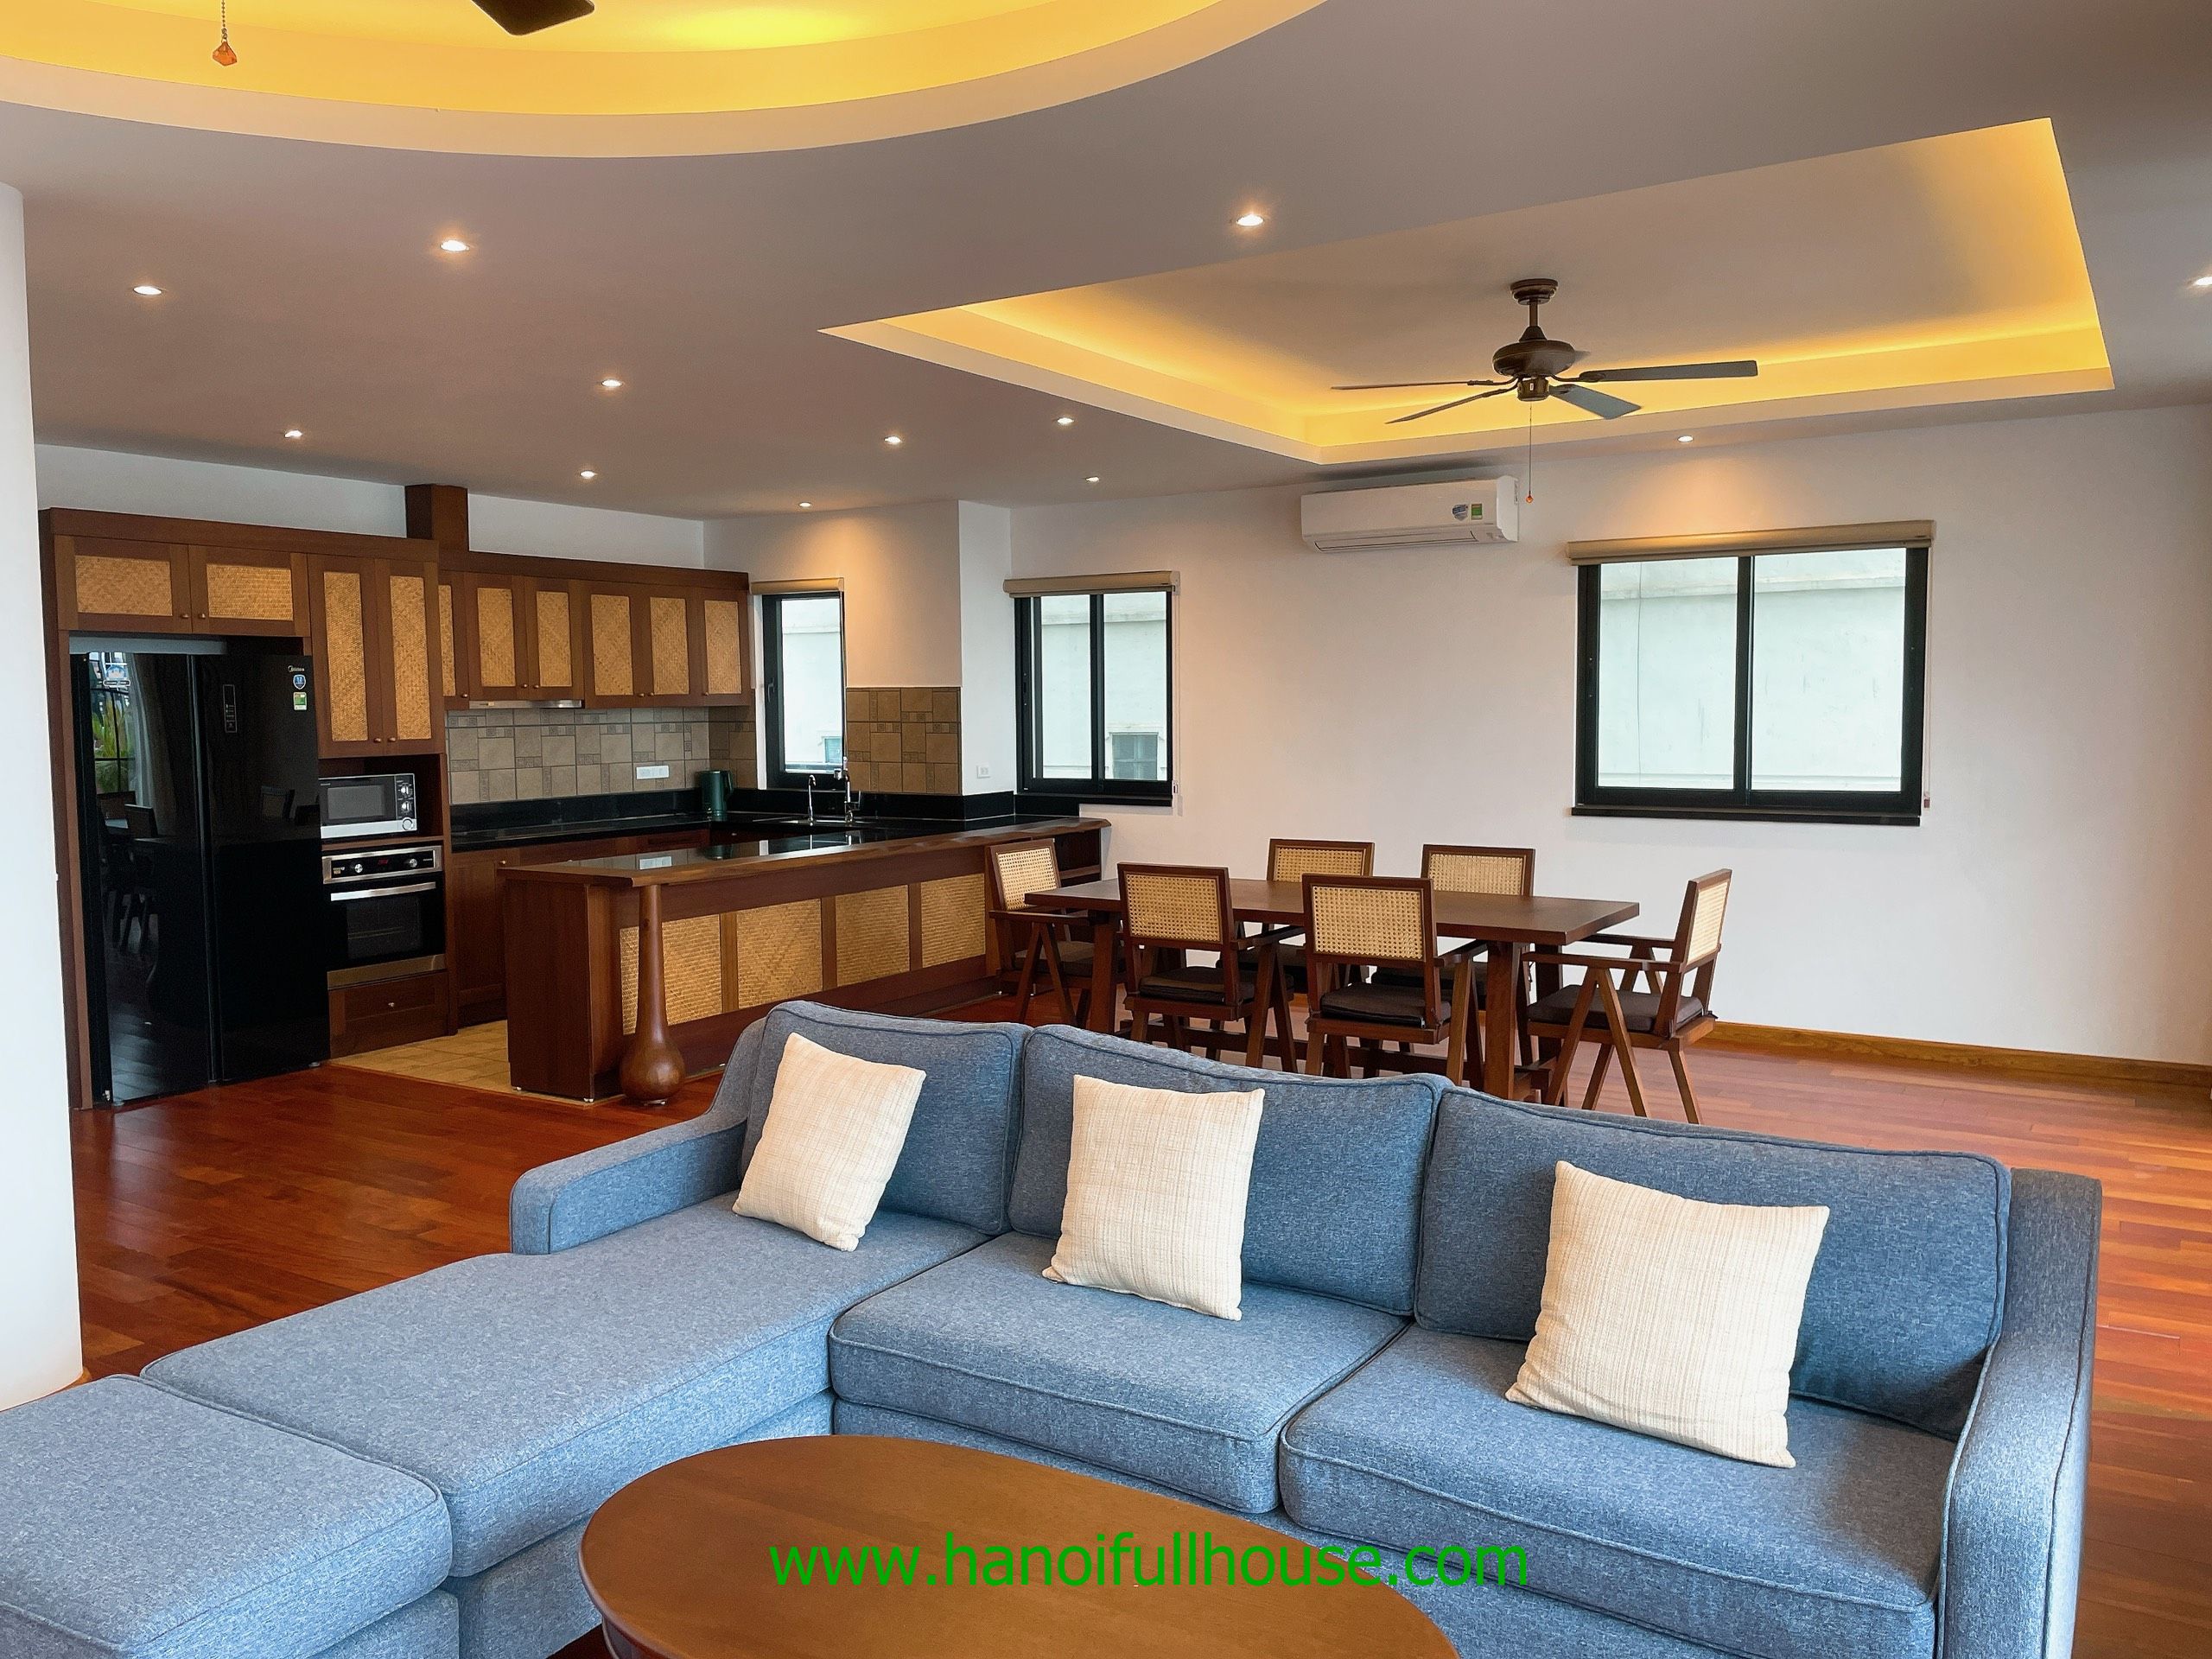 4 Bedroom duplex apartment in Tay Ho for lease